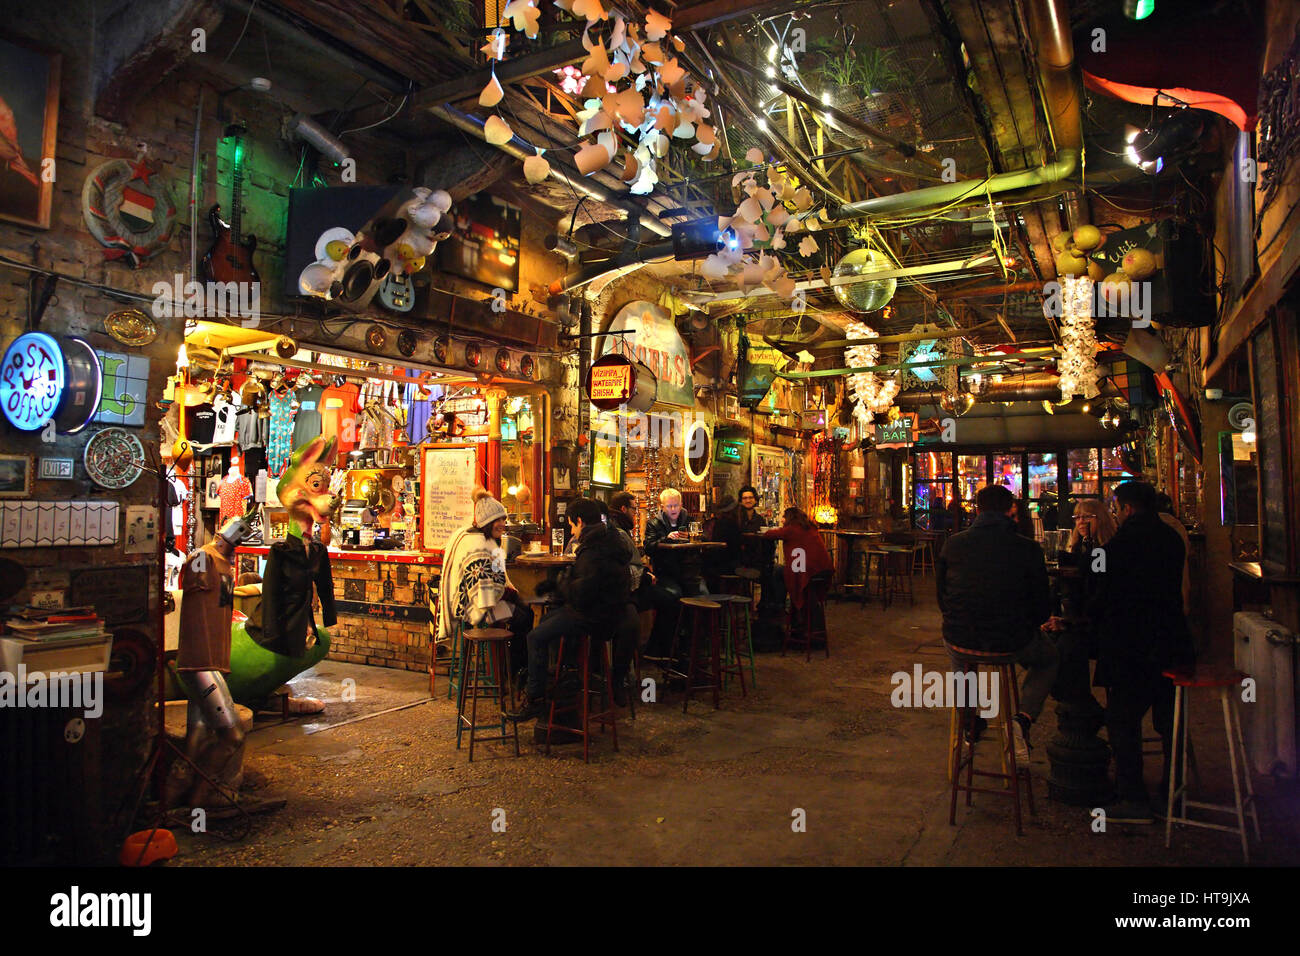 The 'Szimpla Kert' one of the oldest and most famous 'Ruin-pubs' in Budapest, Hungary Stock Photo